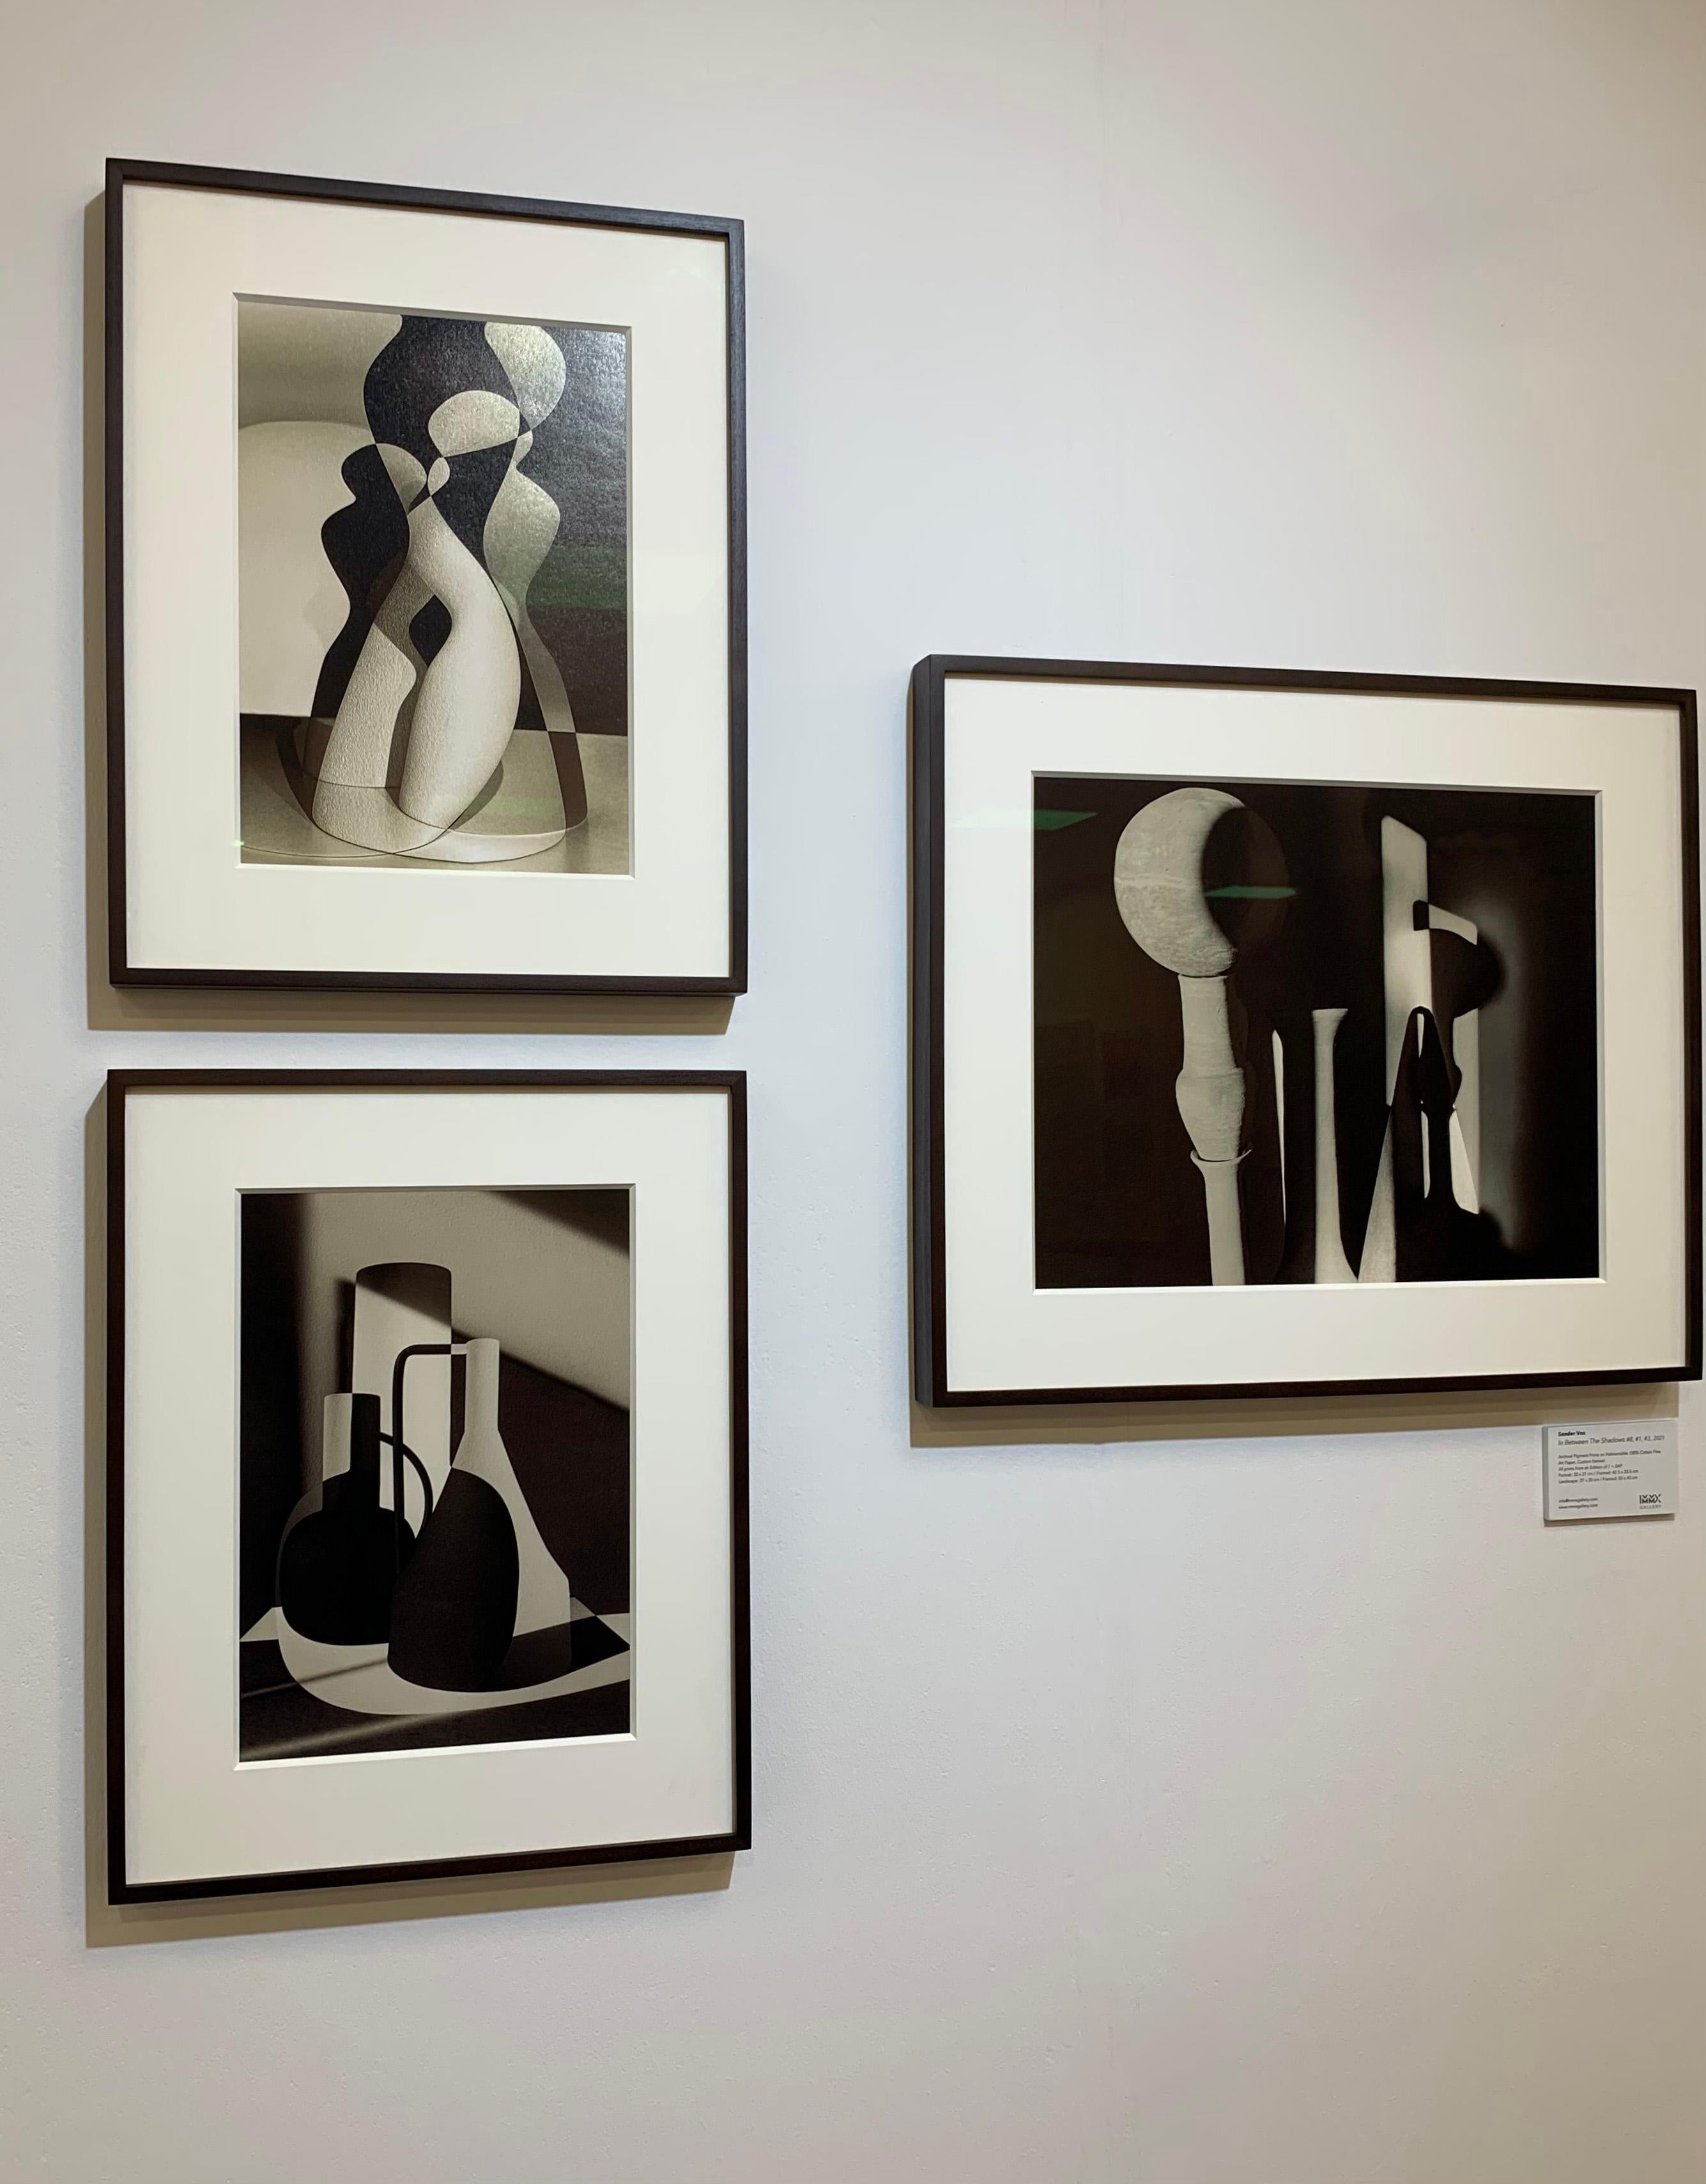 In Between the shadows, Cubist sculpture, female figure abstract prints - Beige Figurative Print by Sander Vos